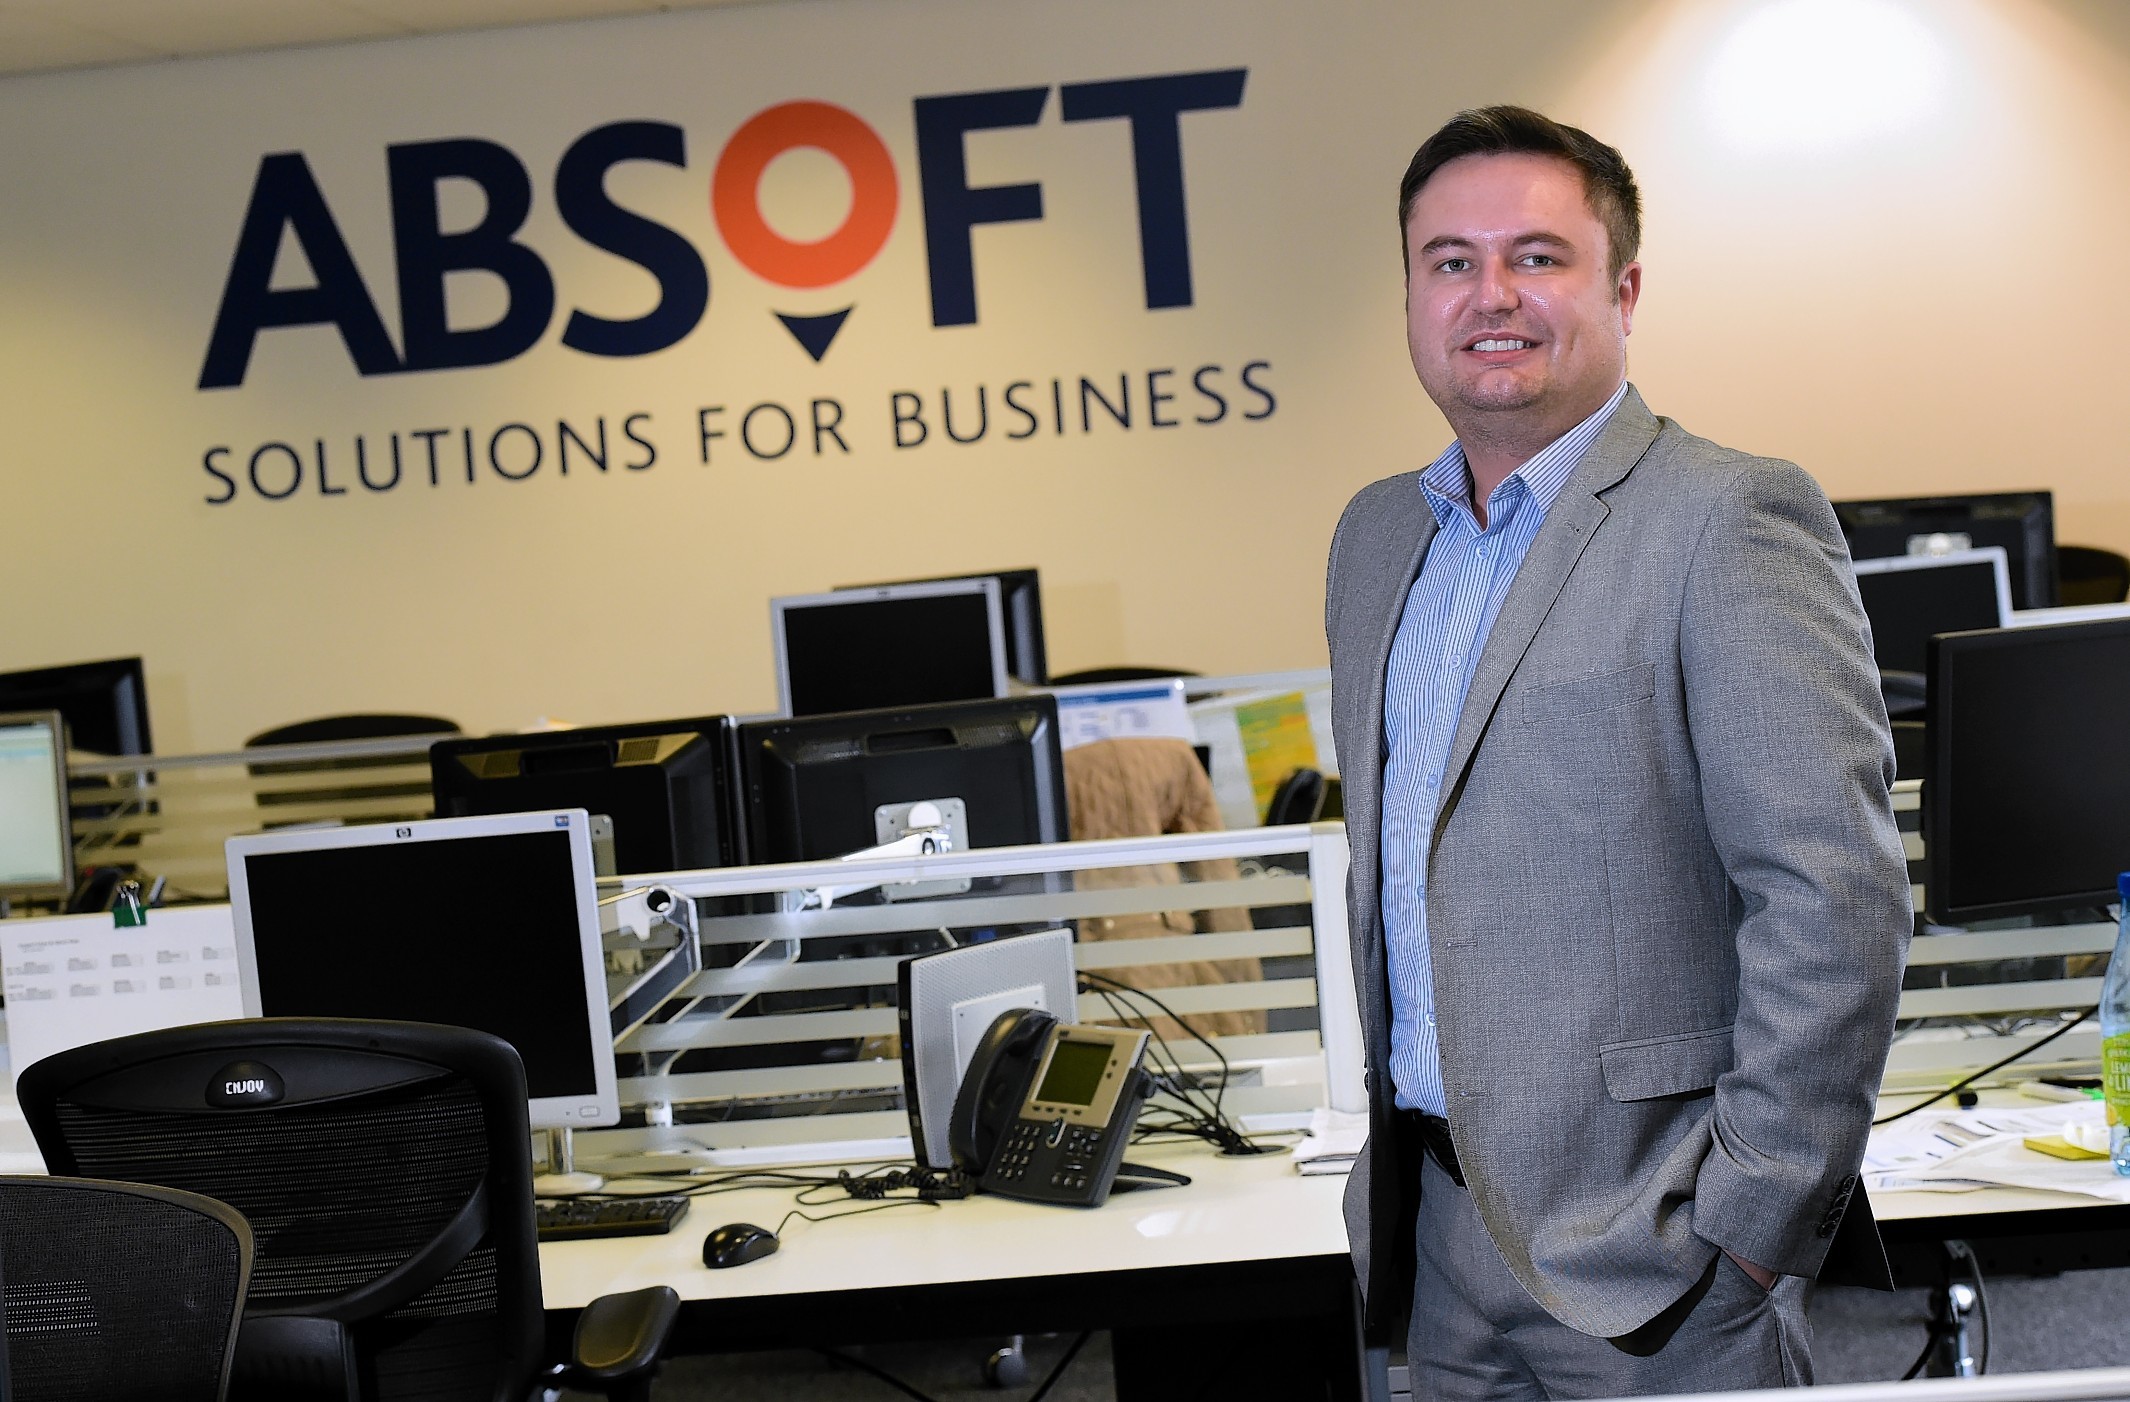 Keith Davidson of Absoft.